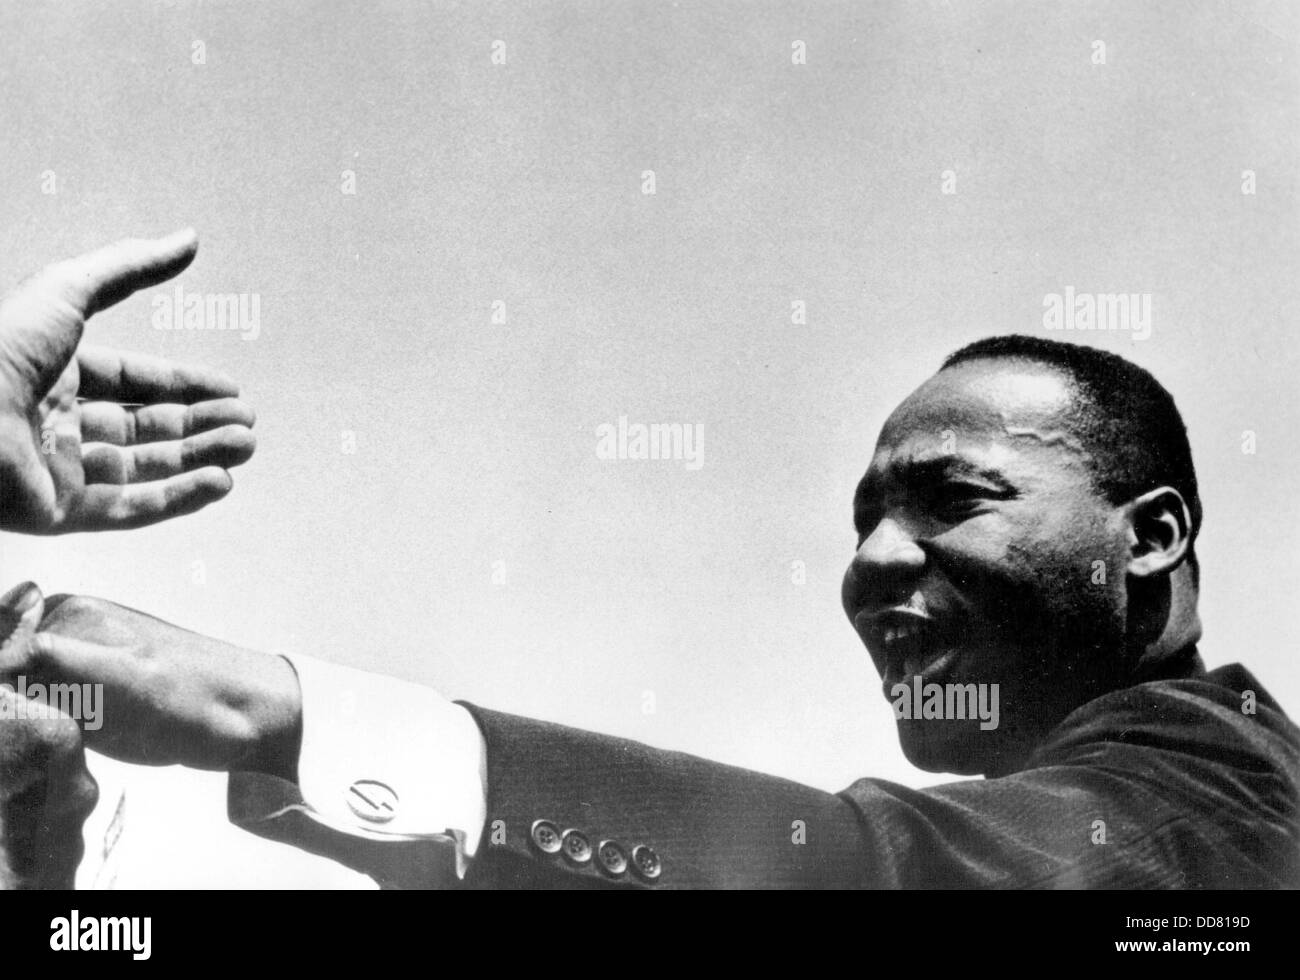 Washington, District of Columbia, USA. 28th Aug, 2013. Aug. 12, 1963 - Washington District of Columbia, U.S. - Reverend MARTIN LUTHER KING, Jr. shaking hands during 'The March on Washington for Jobs and Freedom.' (Credit Image: © KEYSTONE Pictures USA/ZUMAPRESS.com) Credit:  Jay Mallin/ZUMAPRESS.com/Alamy Live News Stock Photo